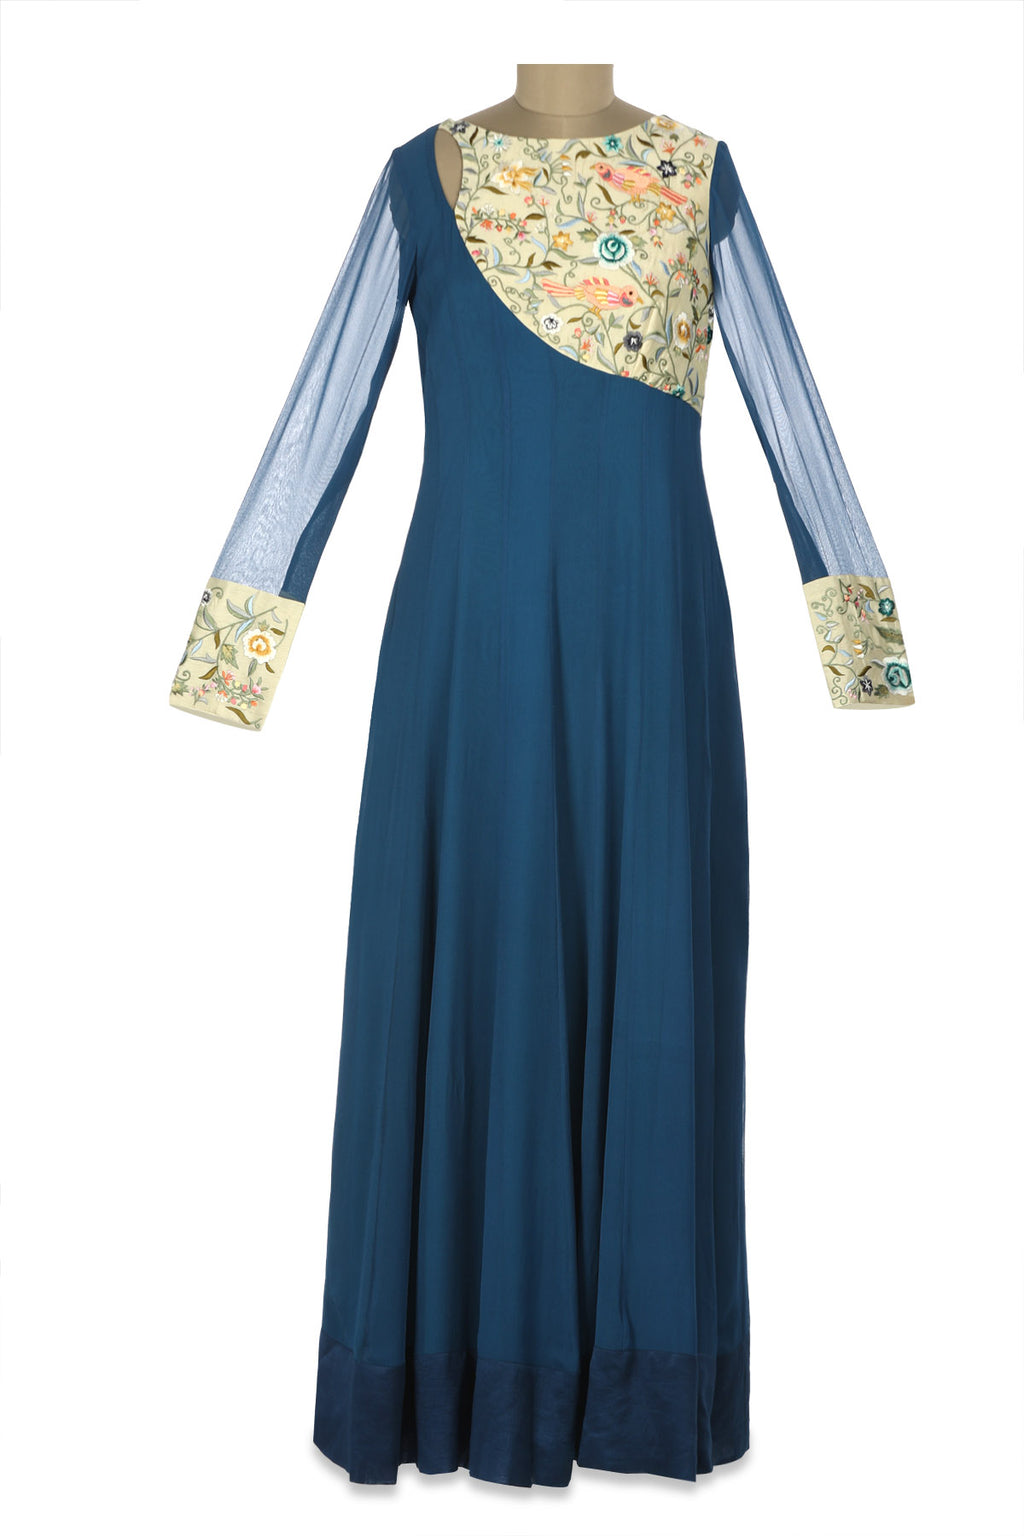 Shop blue Parsi embroidery georgette Anarkali gown online in USA. Shine at weddings and special occasions with beautiful Indian designer Anarkali suits, salwar suits, sharara suits, designer lehengas from Pure Elegance Indian clothing store in USA.-full view